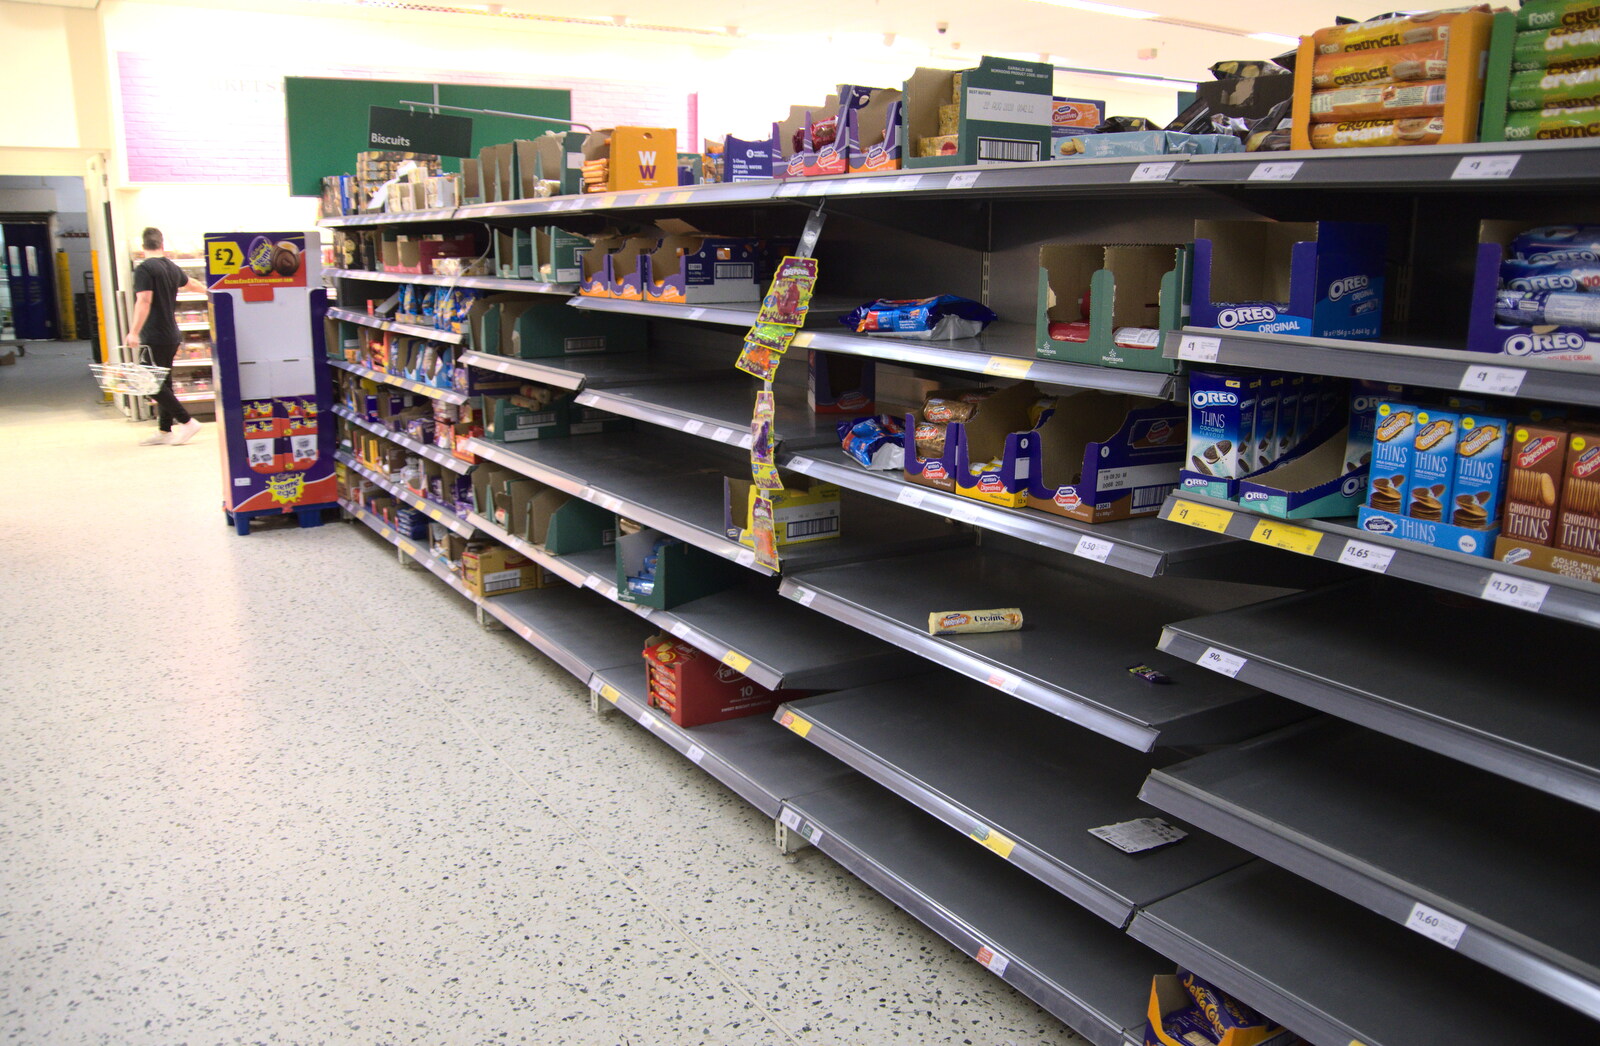 Meanwhile, Morissons is out of biscuits from Life Before Lockdown: A March Miscellany - 22nd March 2020